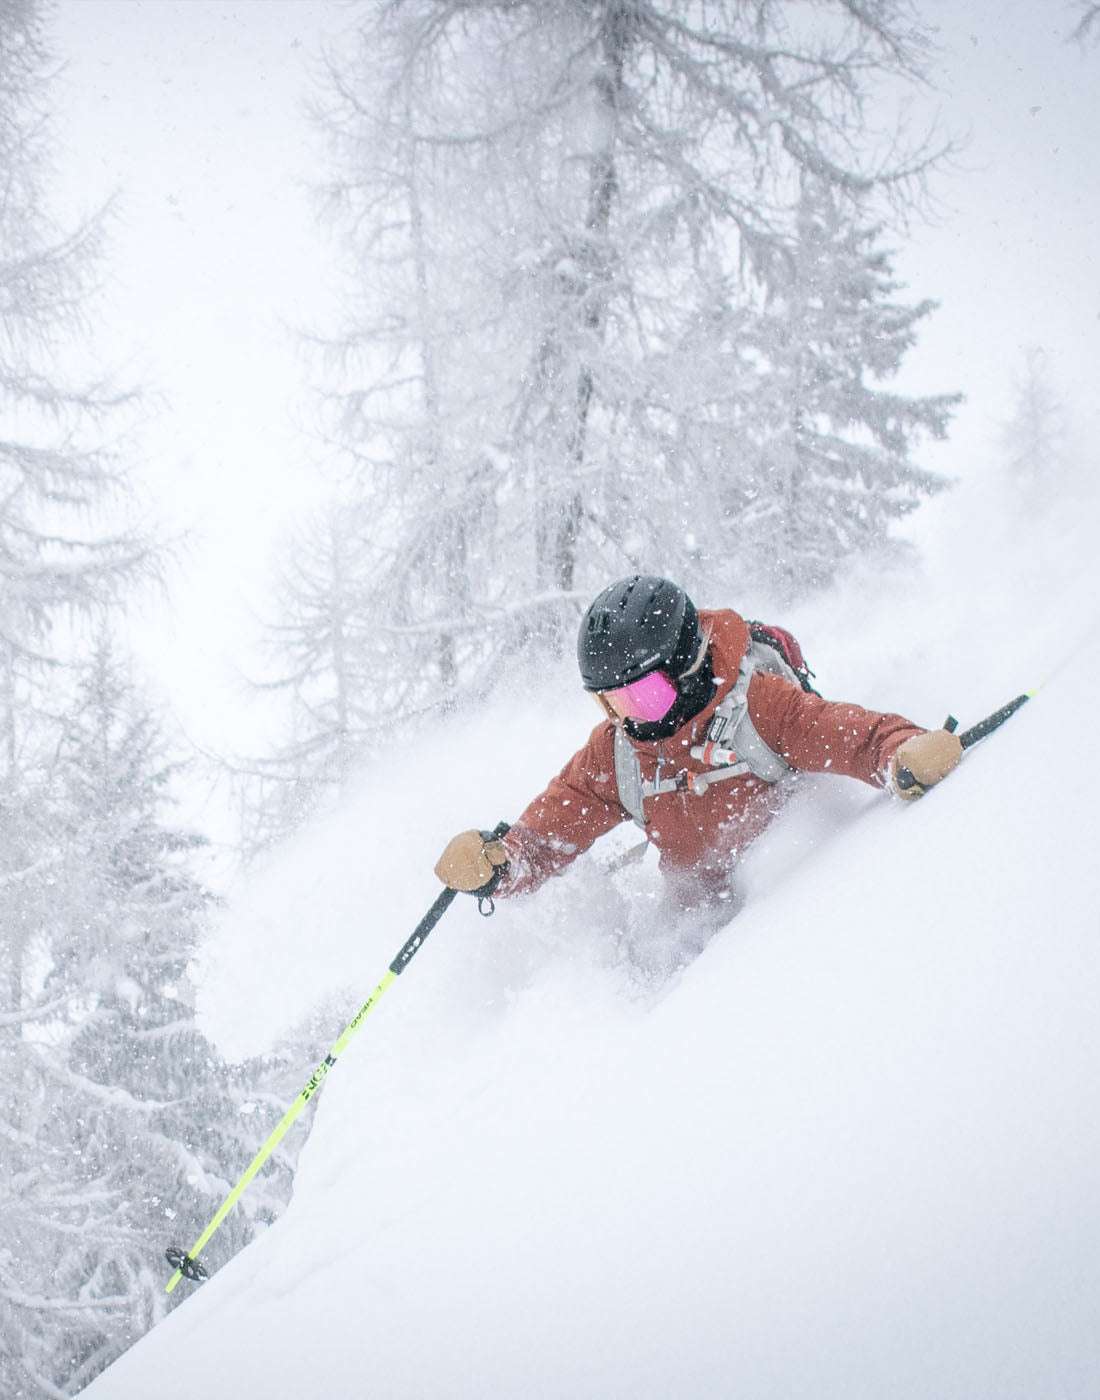 Image of a skier in deep powder doing a turn. Everything is covered in white snow but the upper half of this skier who has a brown jacket gloves, goggles, helmet and poles.